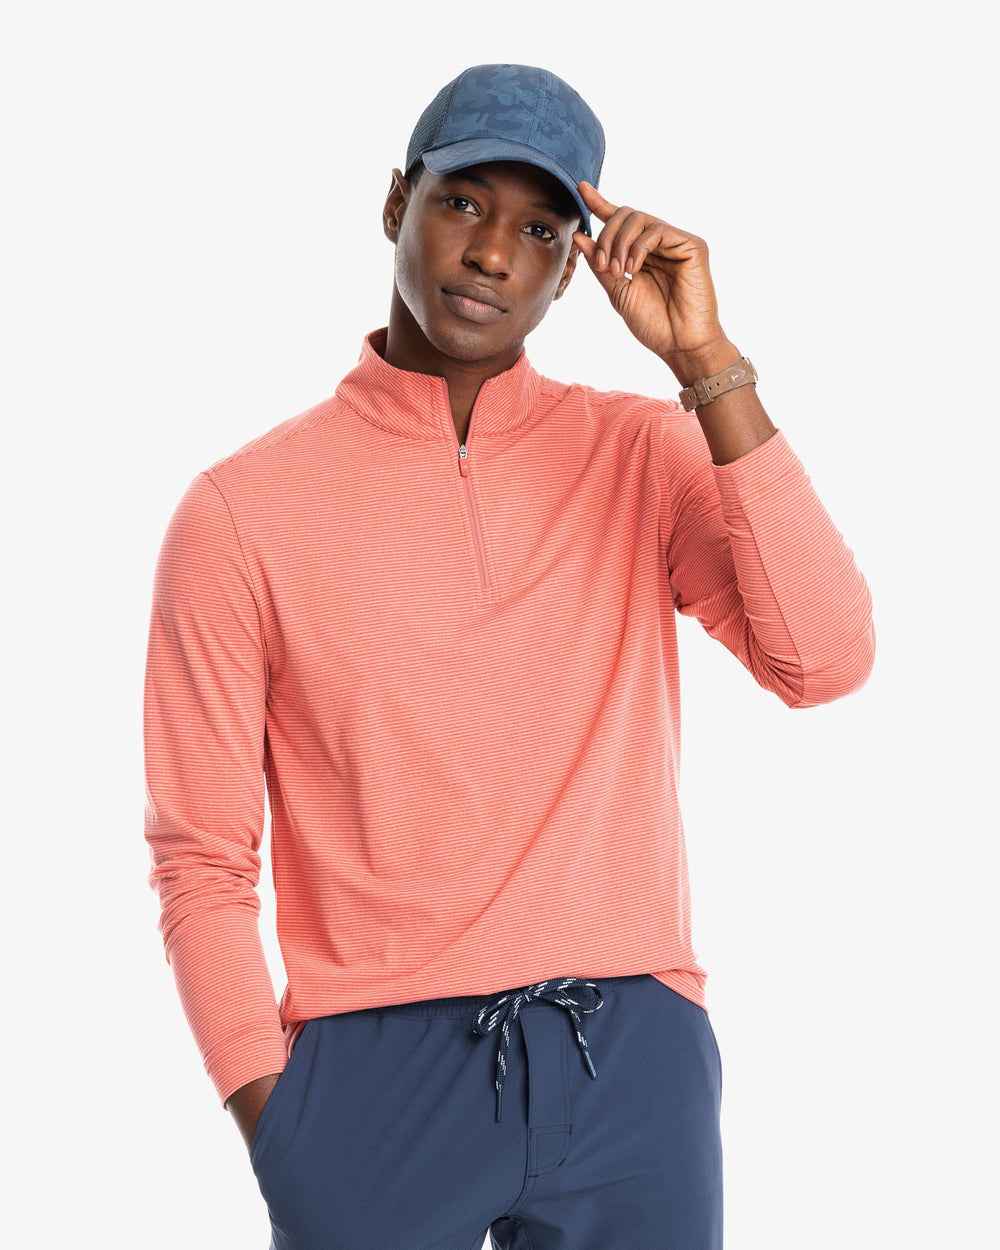 The model front view of the Cruiser Heather Micro Striped Performance Quarter Zip Pullover by Southern Tide - Heather Mineral Red